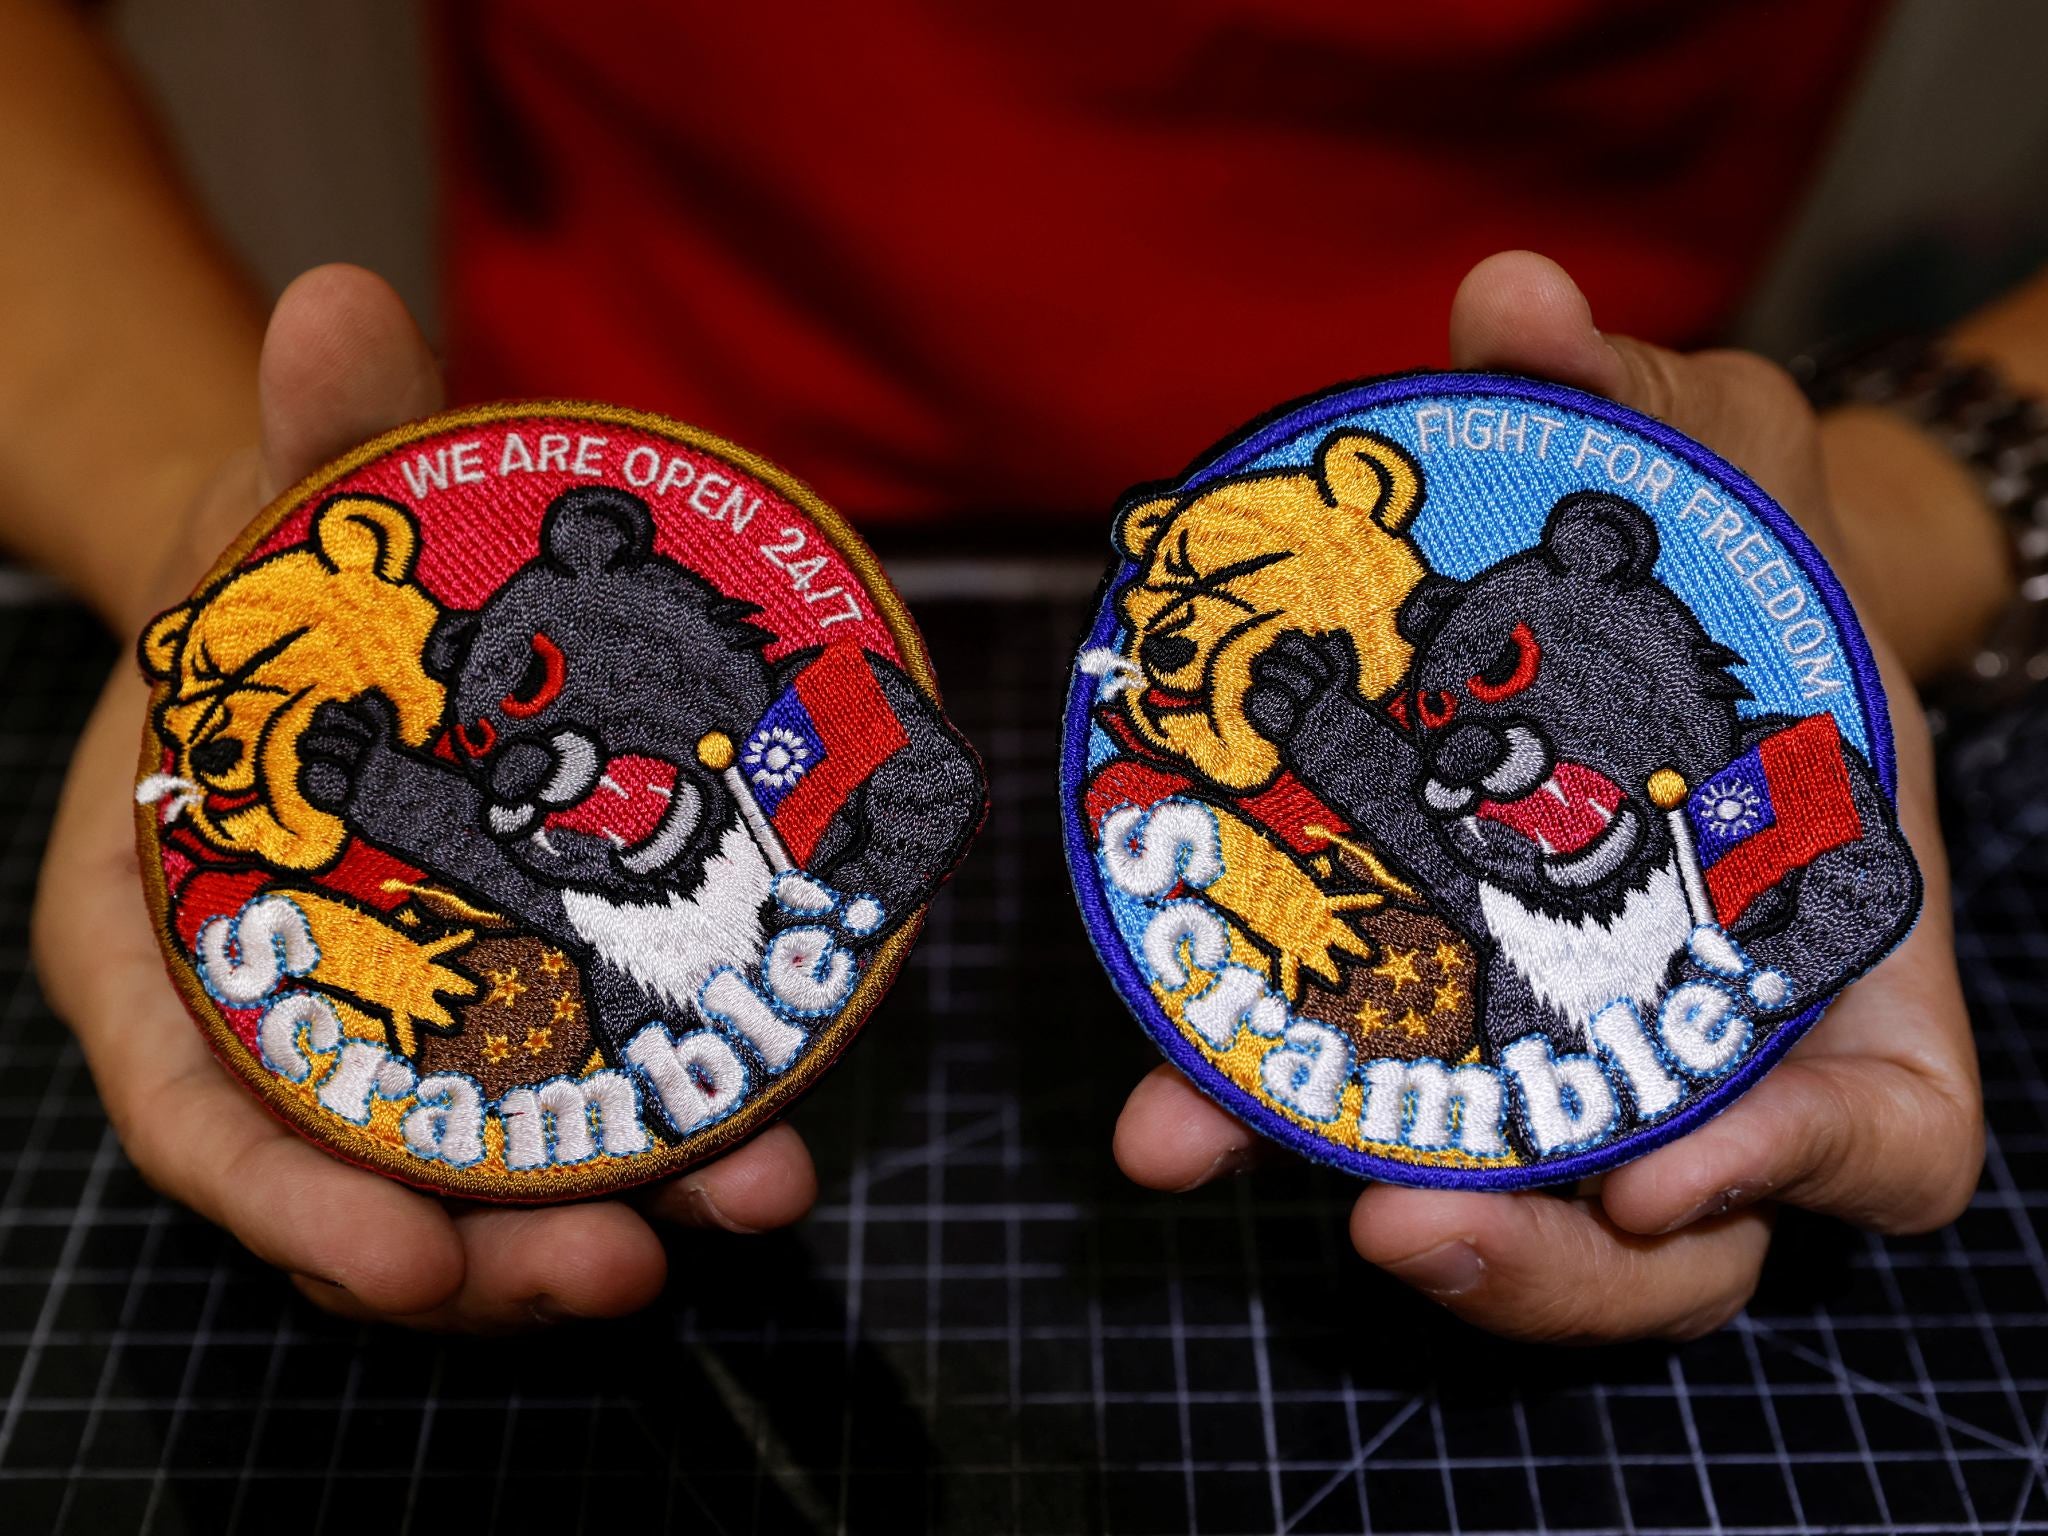 Alec Hsu with the patches depicting a Formosan black bear holding Taiwan’s flag and punching Winnie-the-Pooh